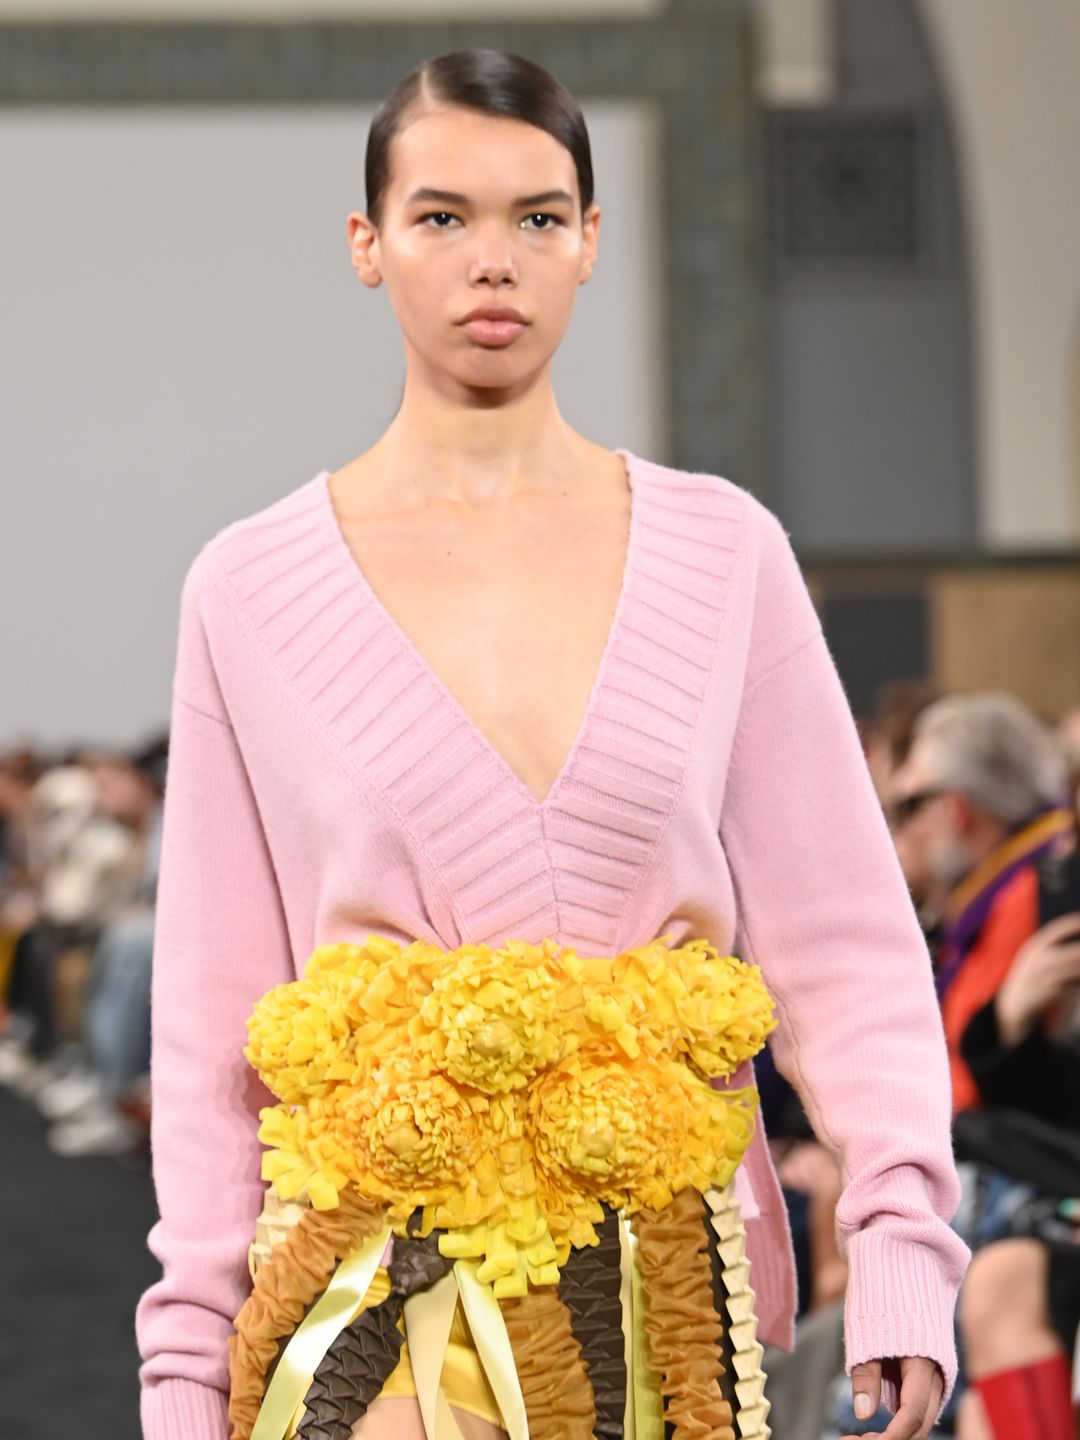  A model walks the runway at the JW Anderson show during London Fashion Week wearing a pink v neck cardigan adorned with yellow flowers